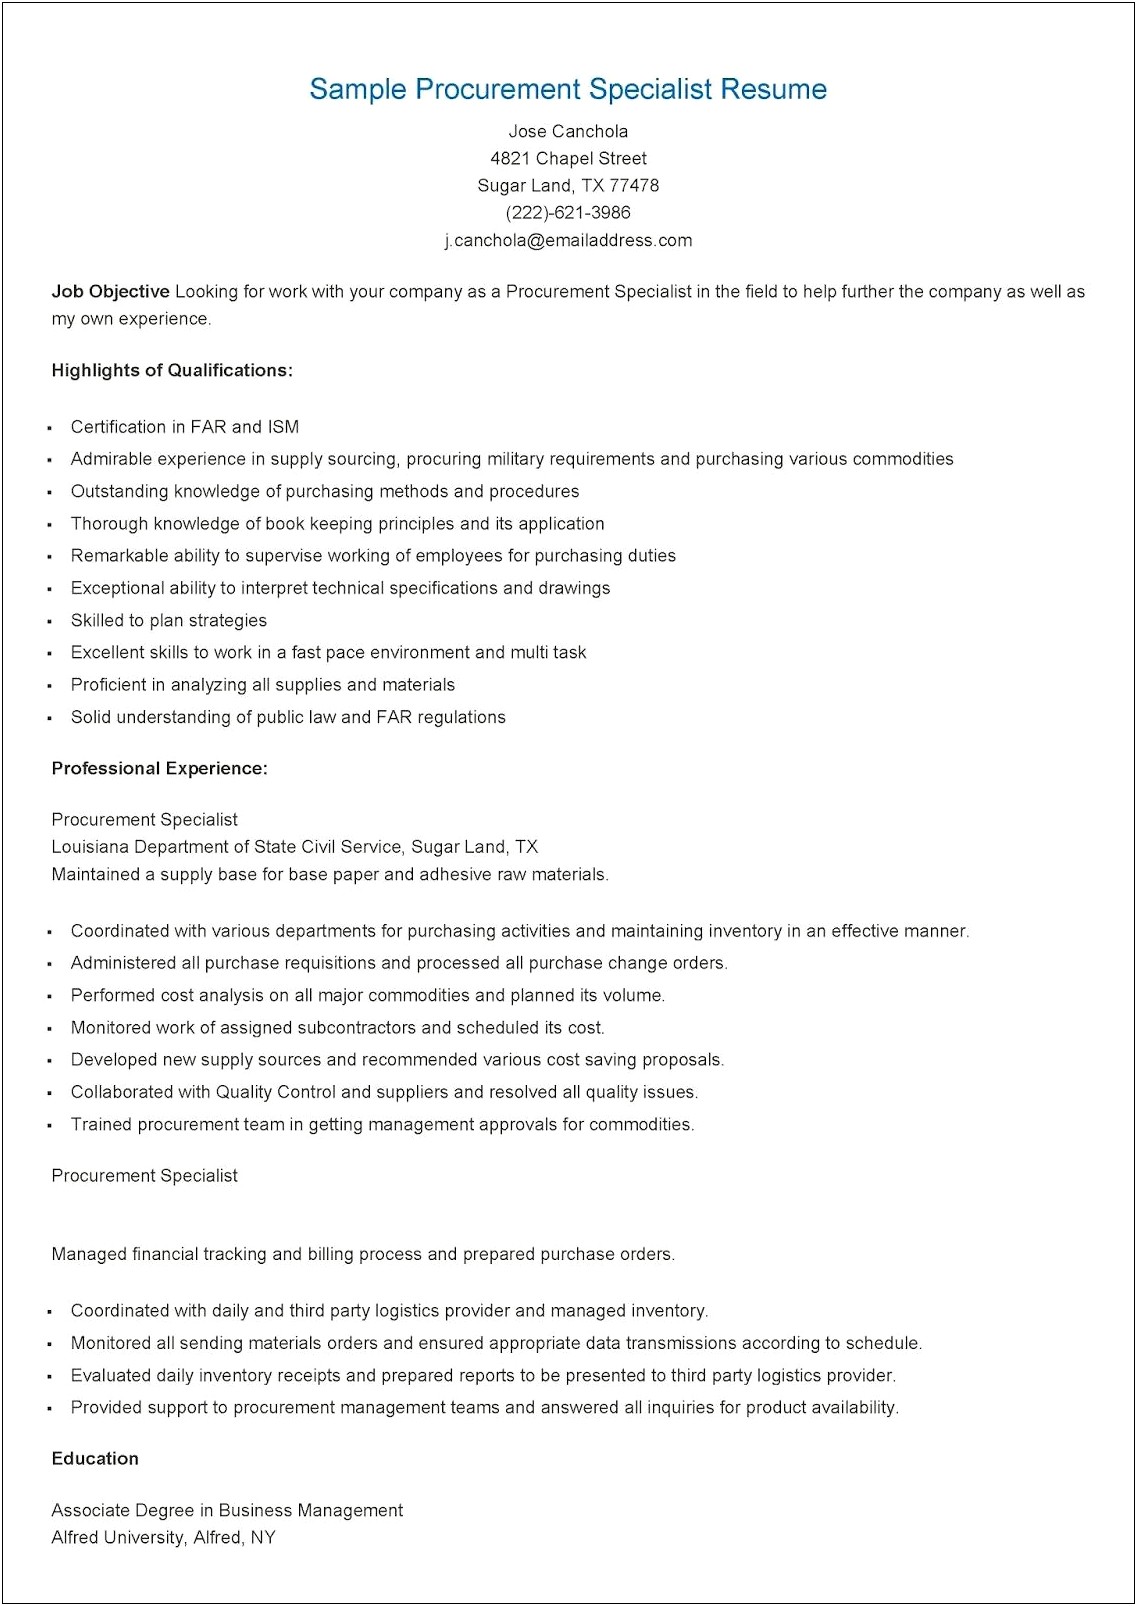 Inventory Control Specialist Resume Sample